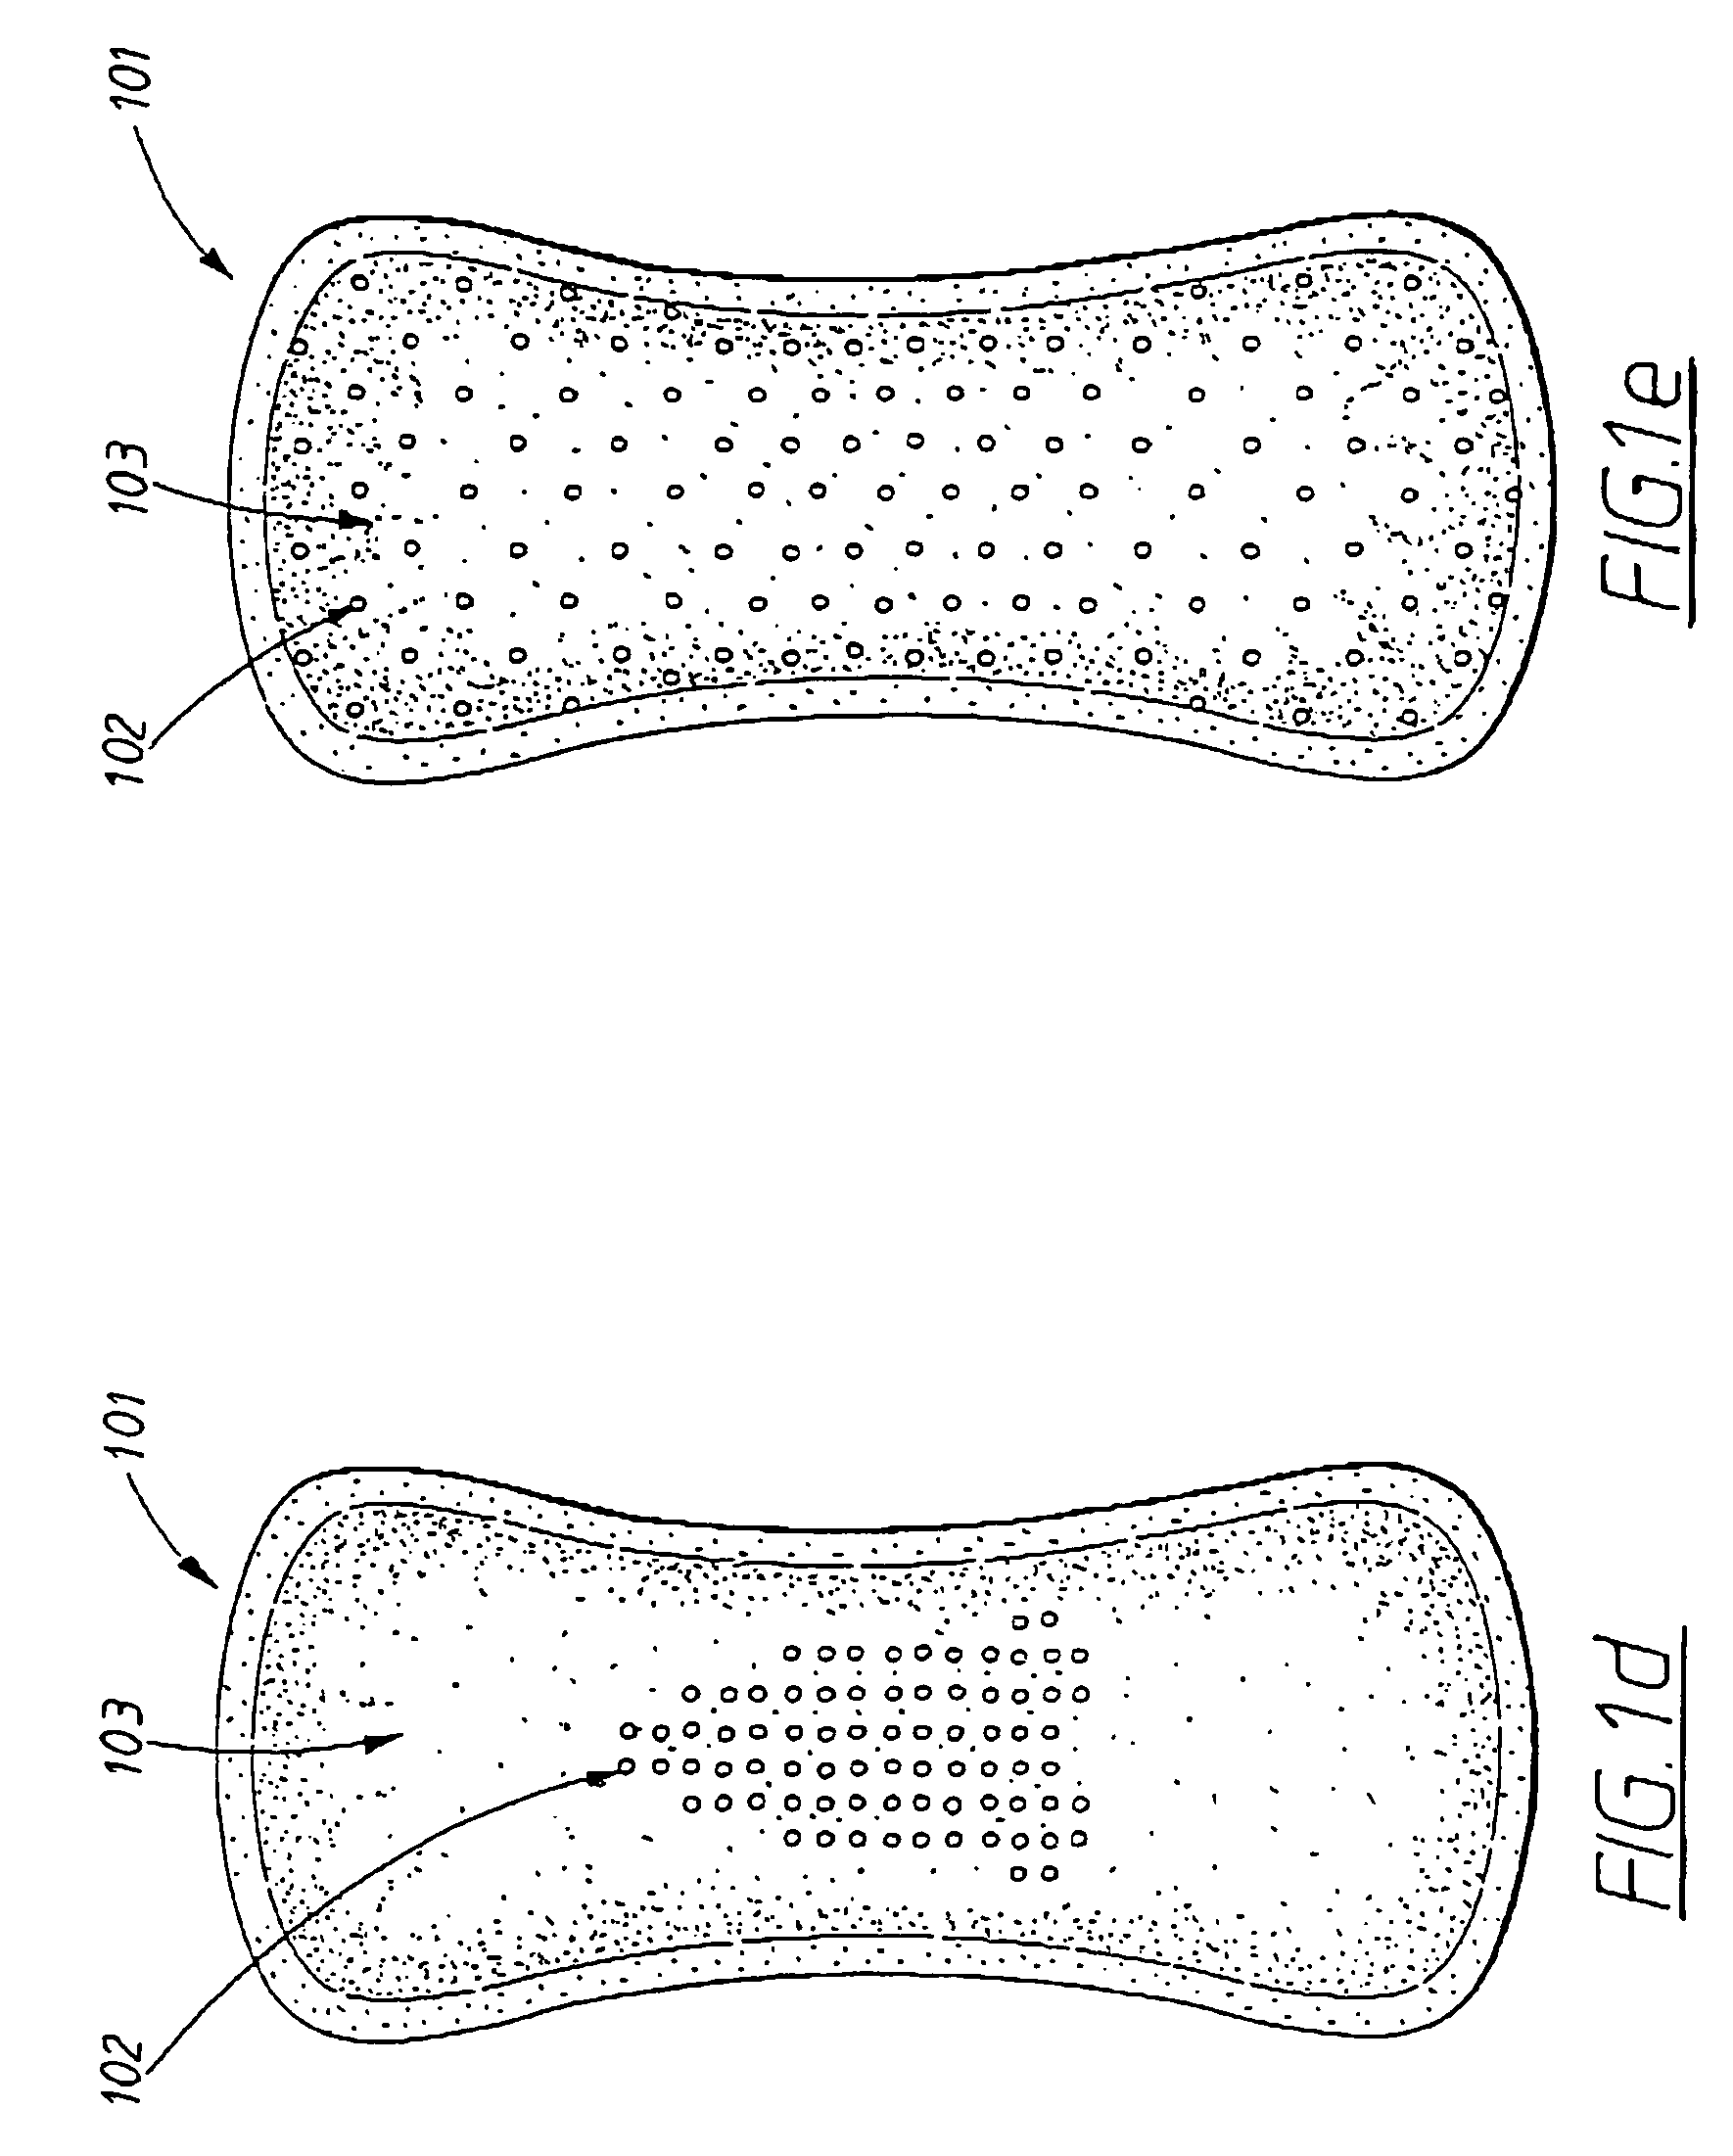 Carrier for additive in an absorbent article